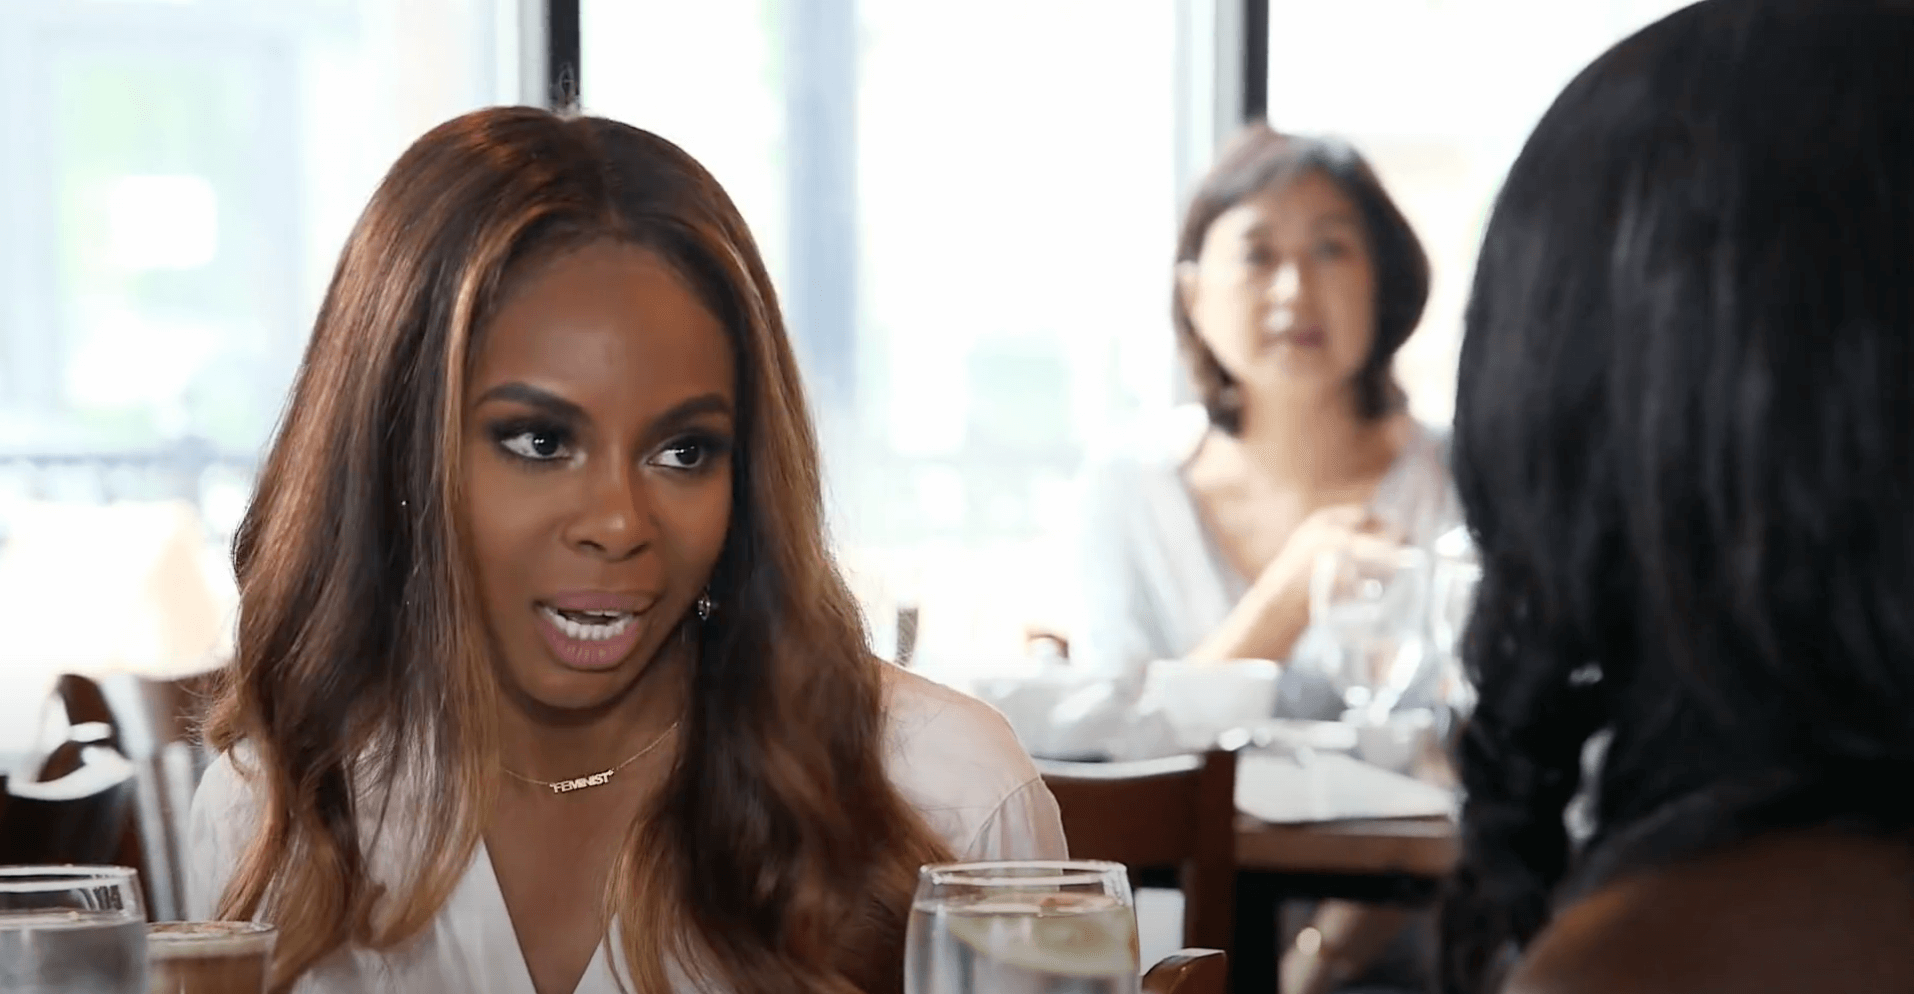 Candiace Dillard Is Thrilled Wendy Osefo & Ashley Darby Are Feuding!